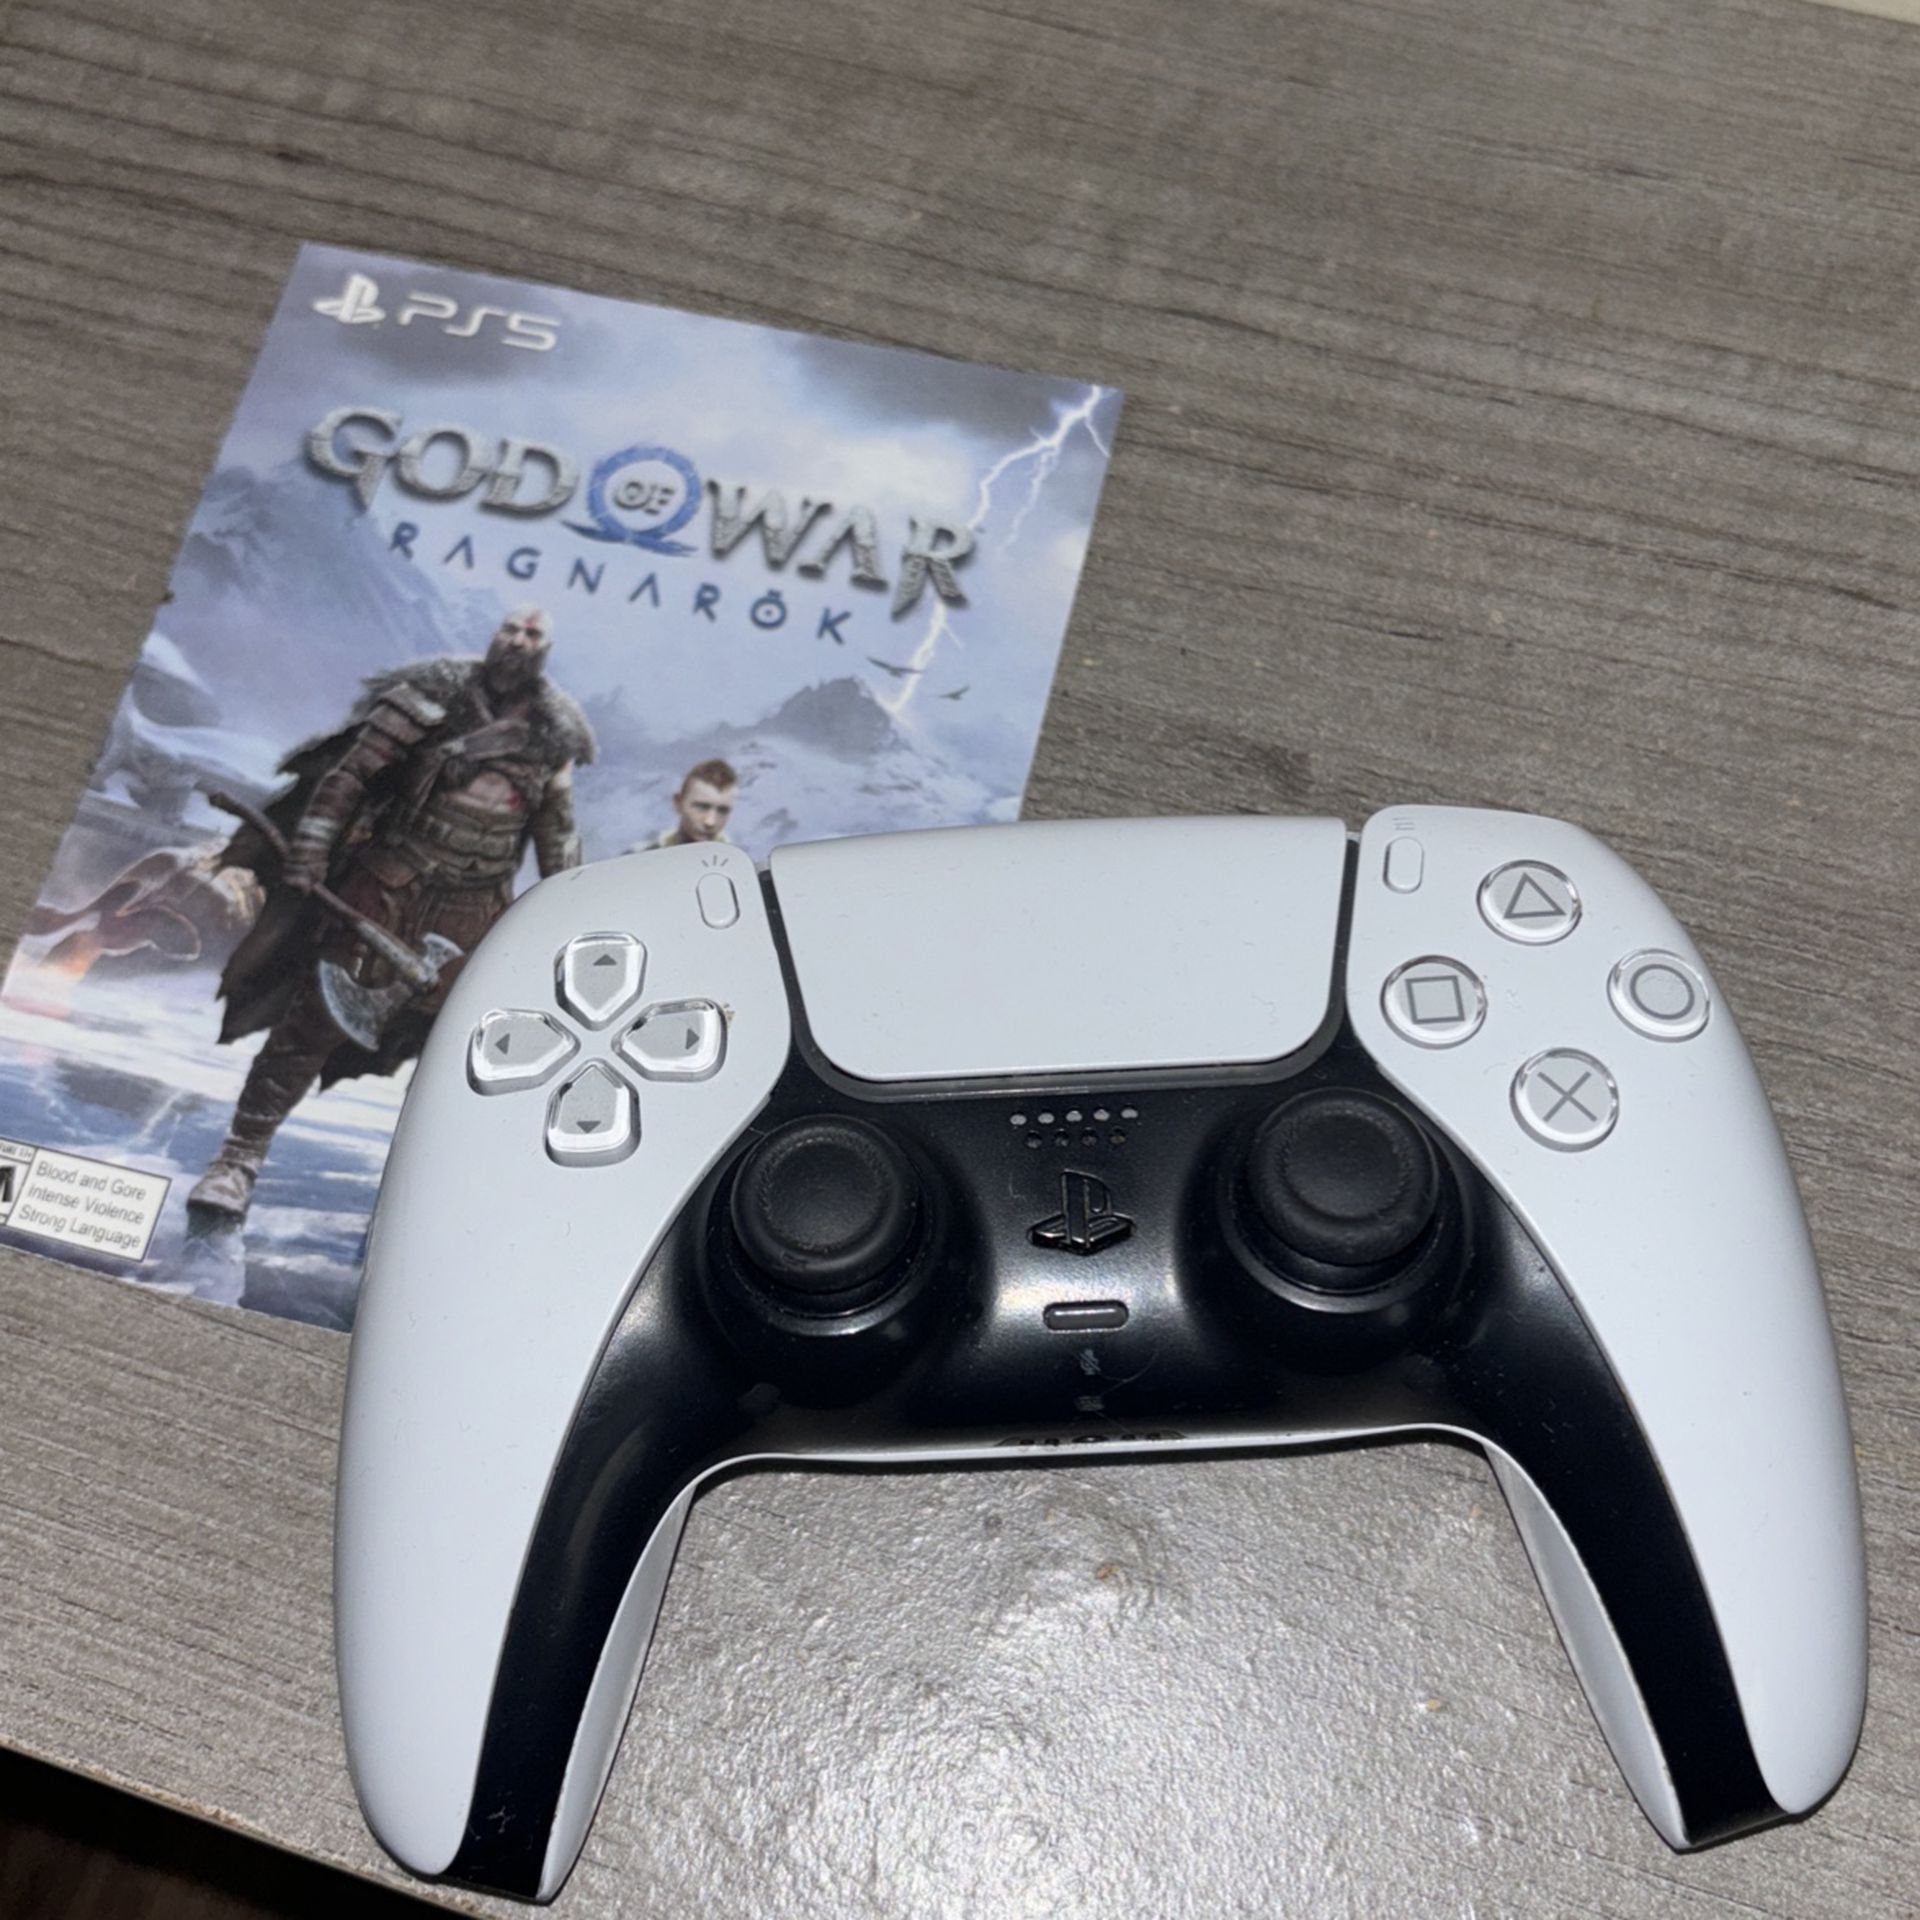 PS5 God of War RAGNAROK With Ps5 Controller 